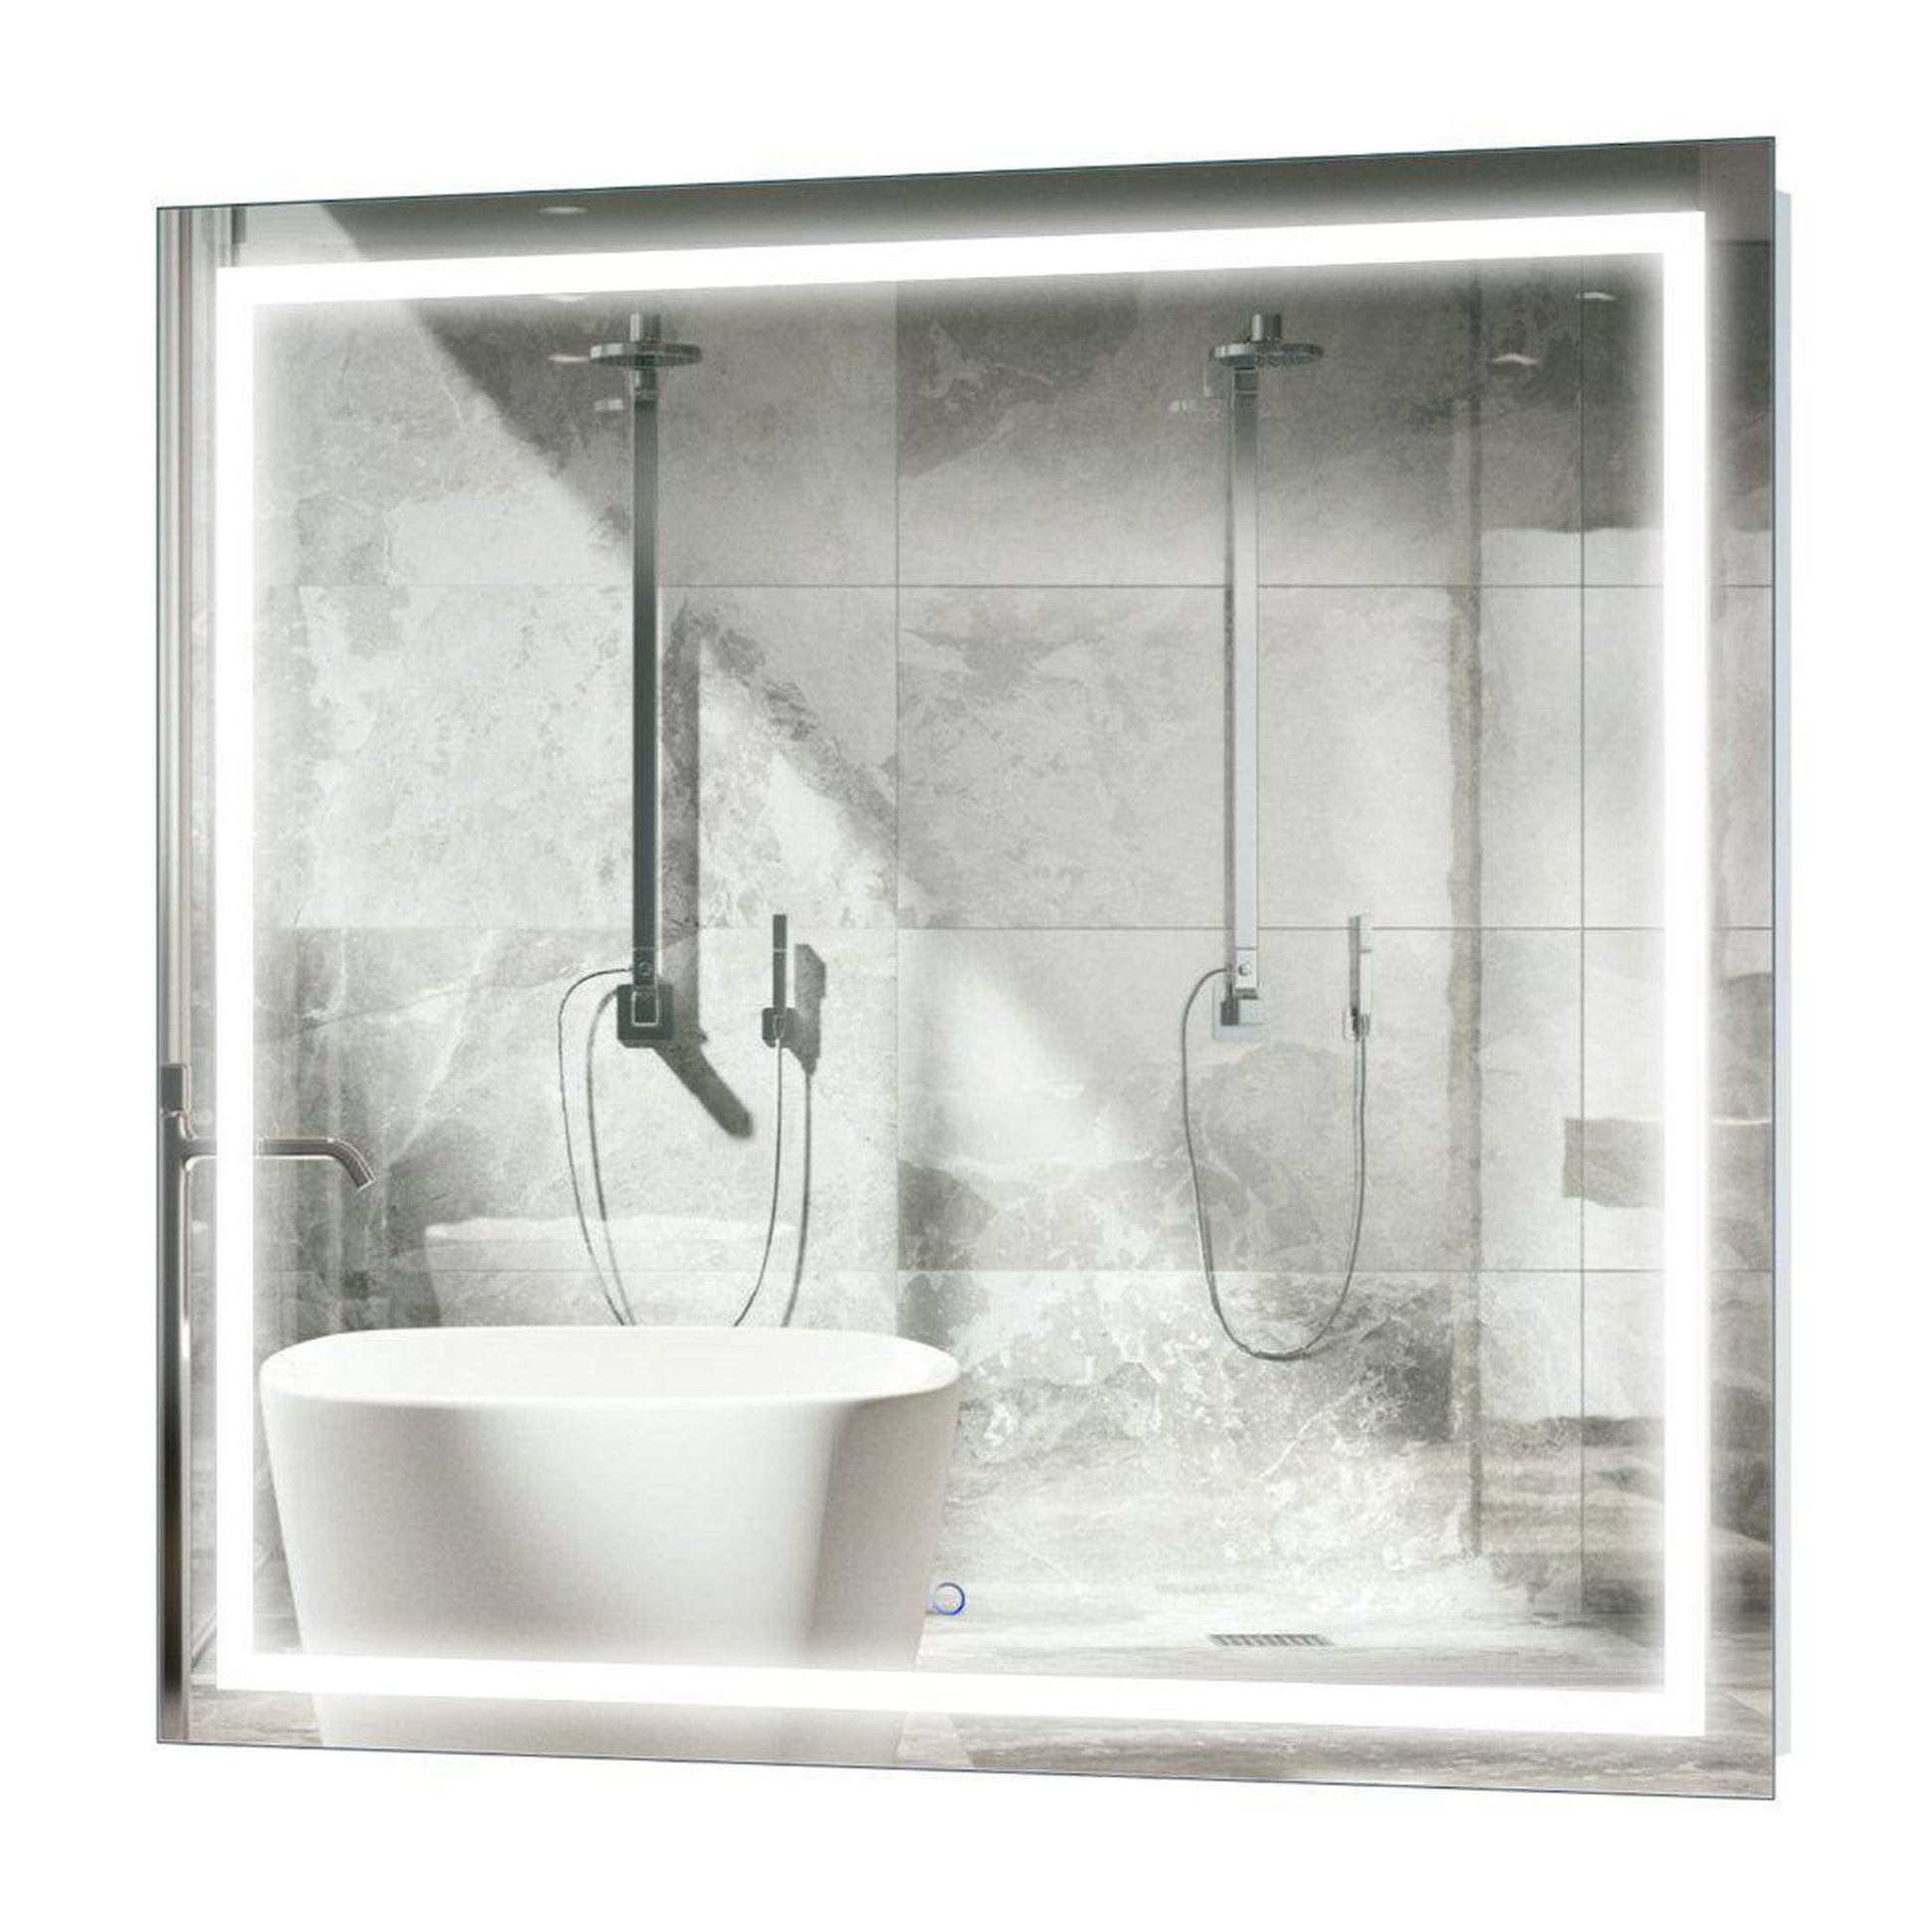 Krugg Reflections Icon 42” x 42” 5000K Square Wall-Mounted Illuminated Silver Backed LED Mirror With Built-in Defogger and Touch Sensor On/Off Built-in Dimmer